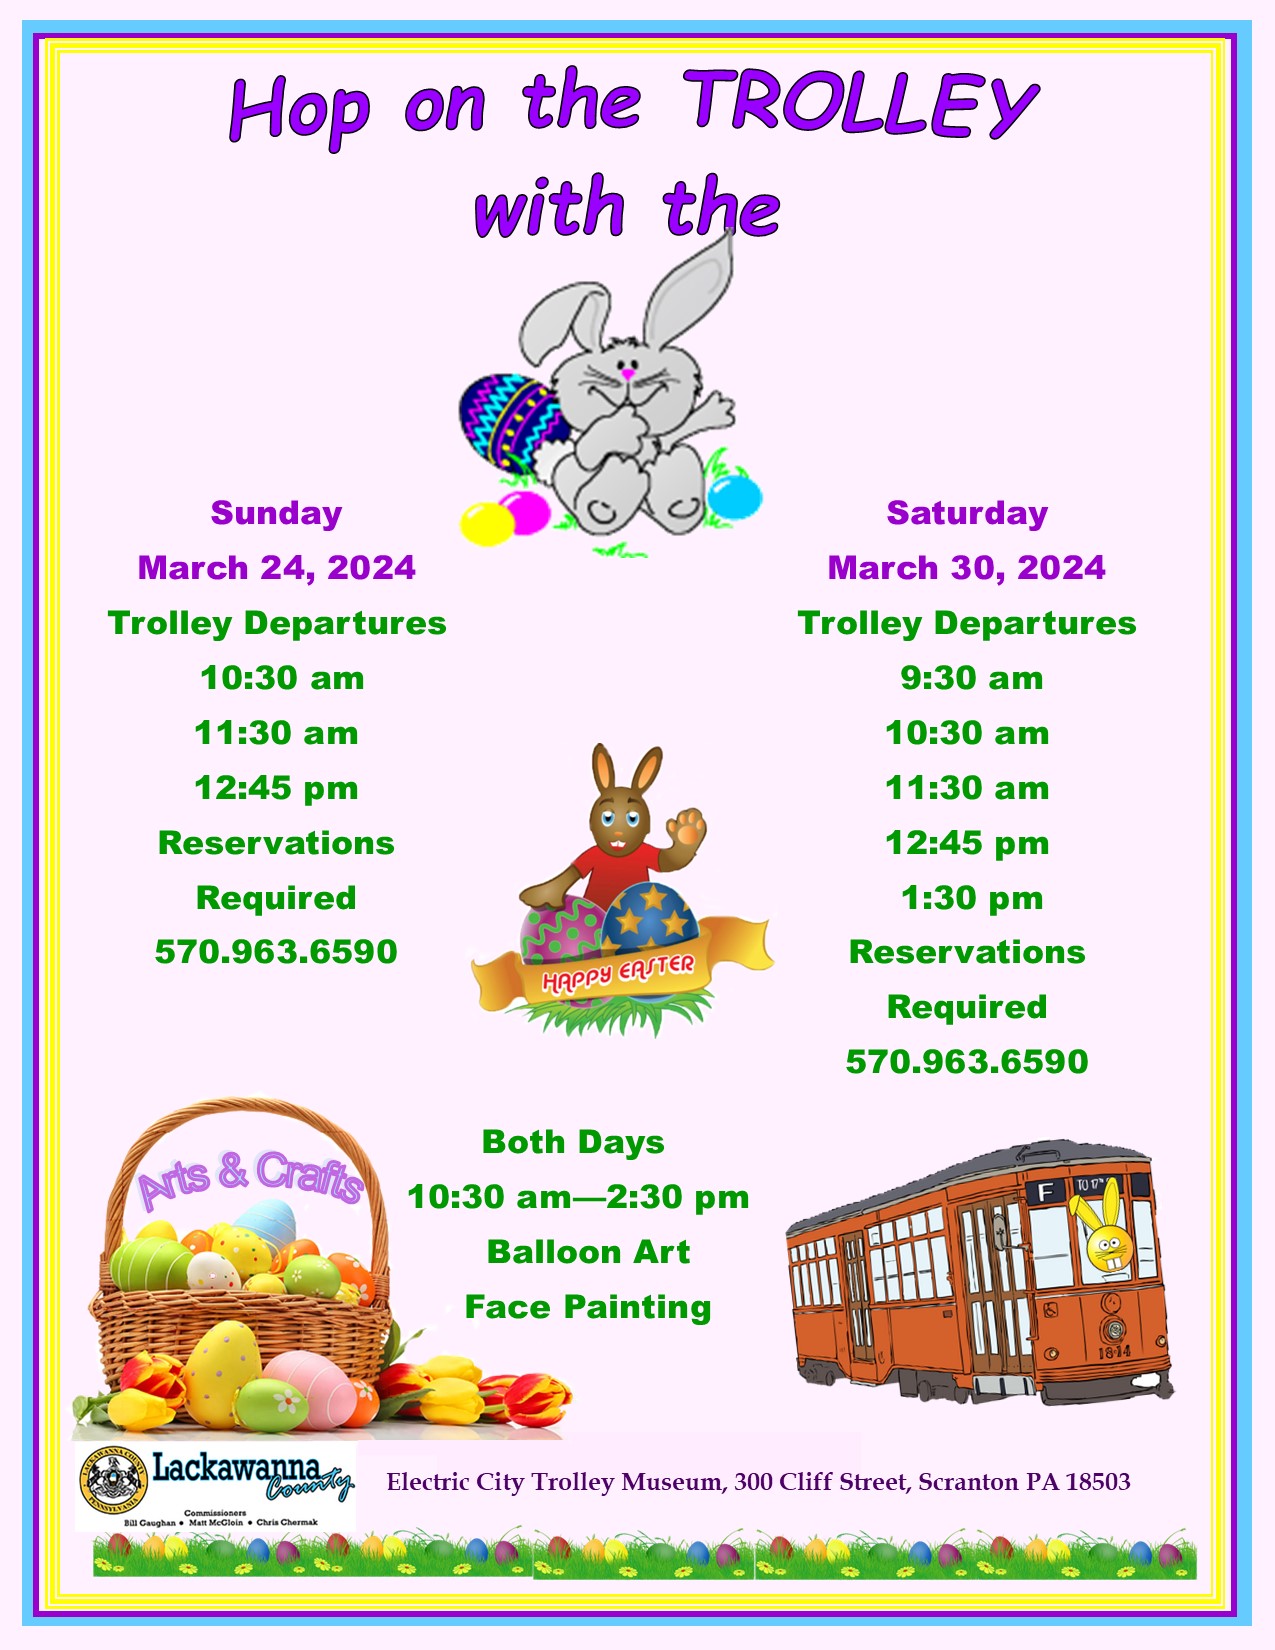 Hop on the Trolley with the Easter Bunny